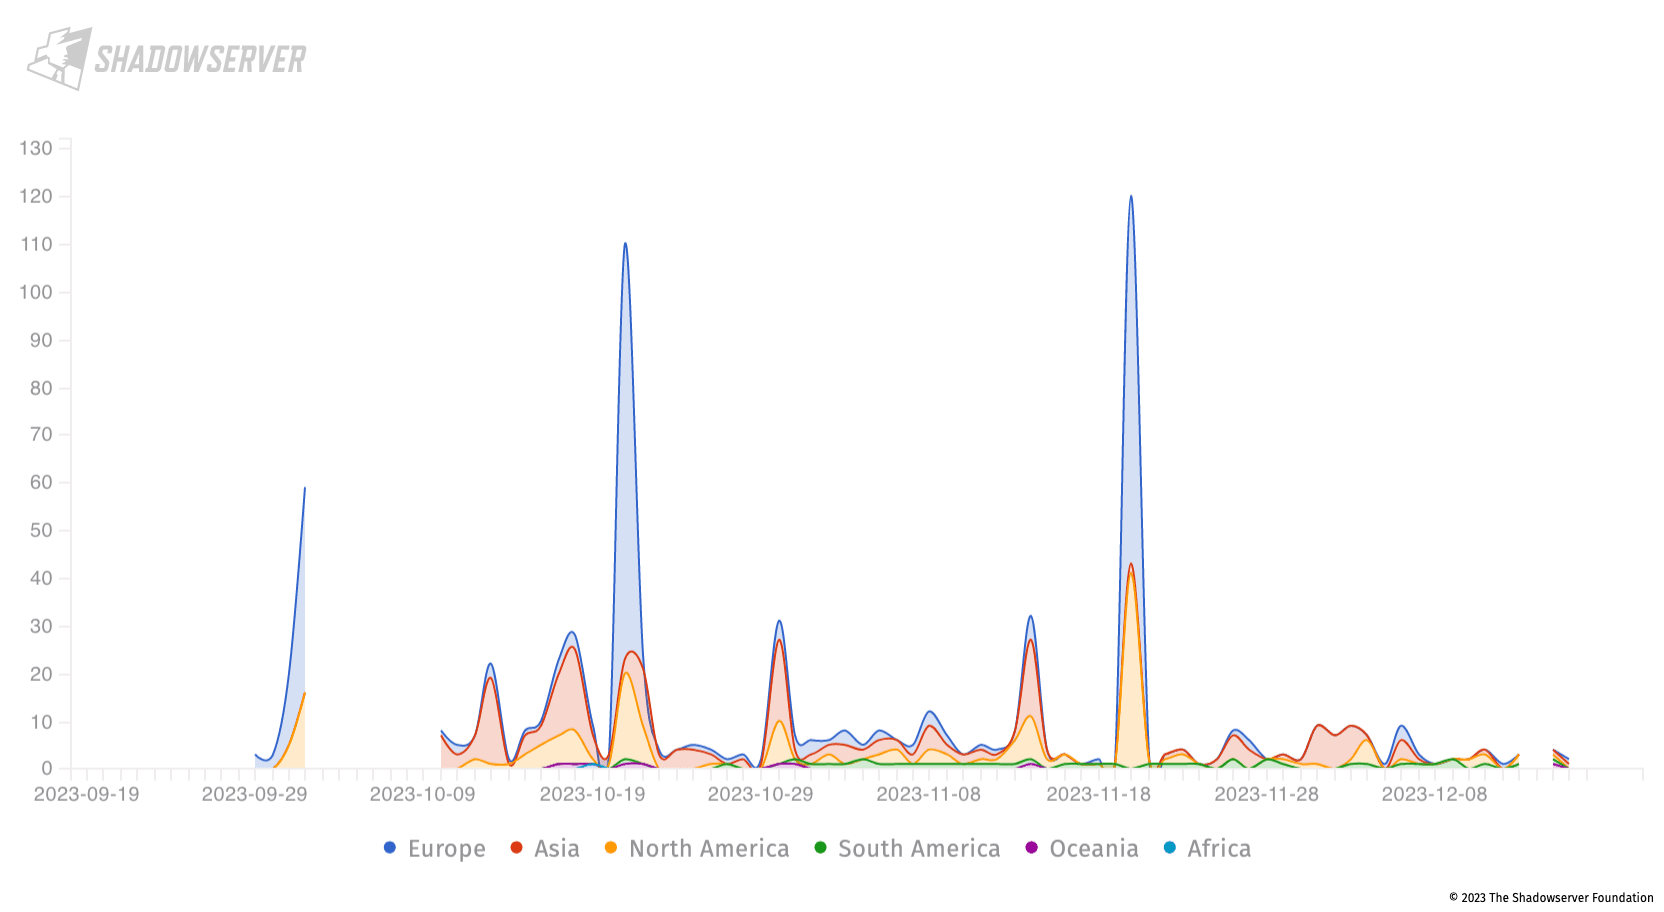 Monitor incidents related to JetBrains TeamCity (CVE-2023-42793) based on their origin